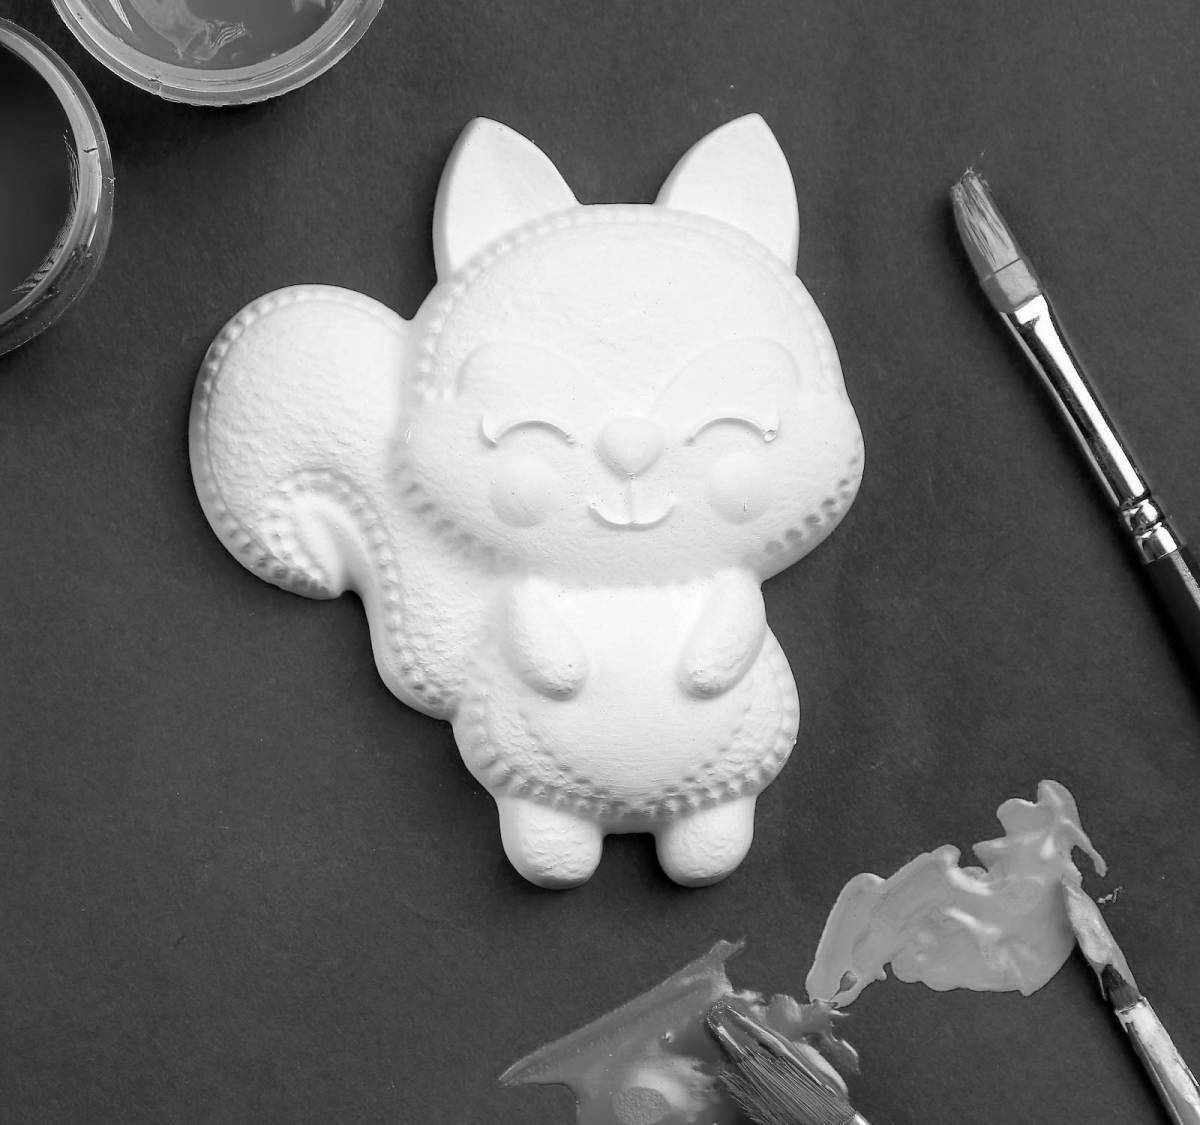 Charming plaster figurines coloring